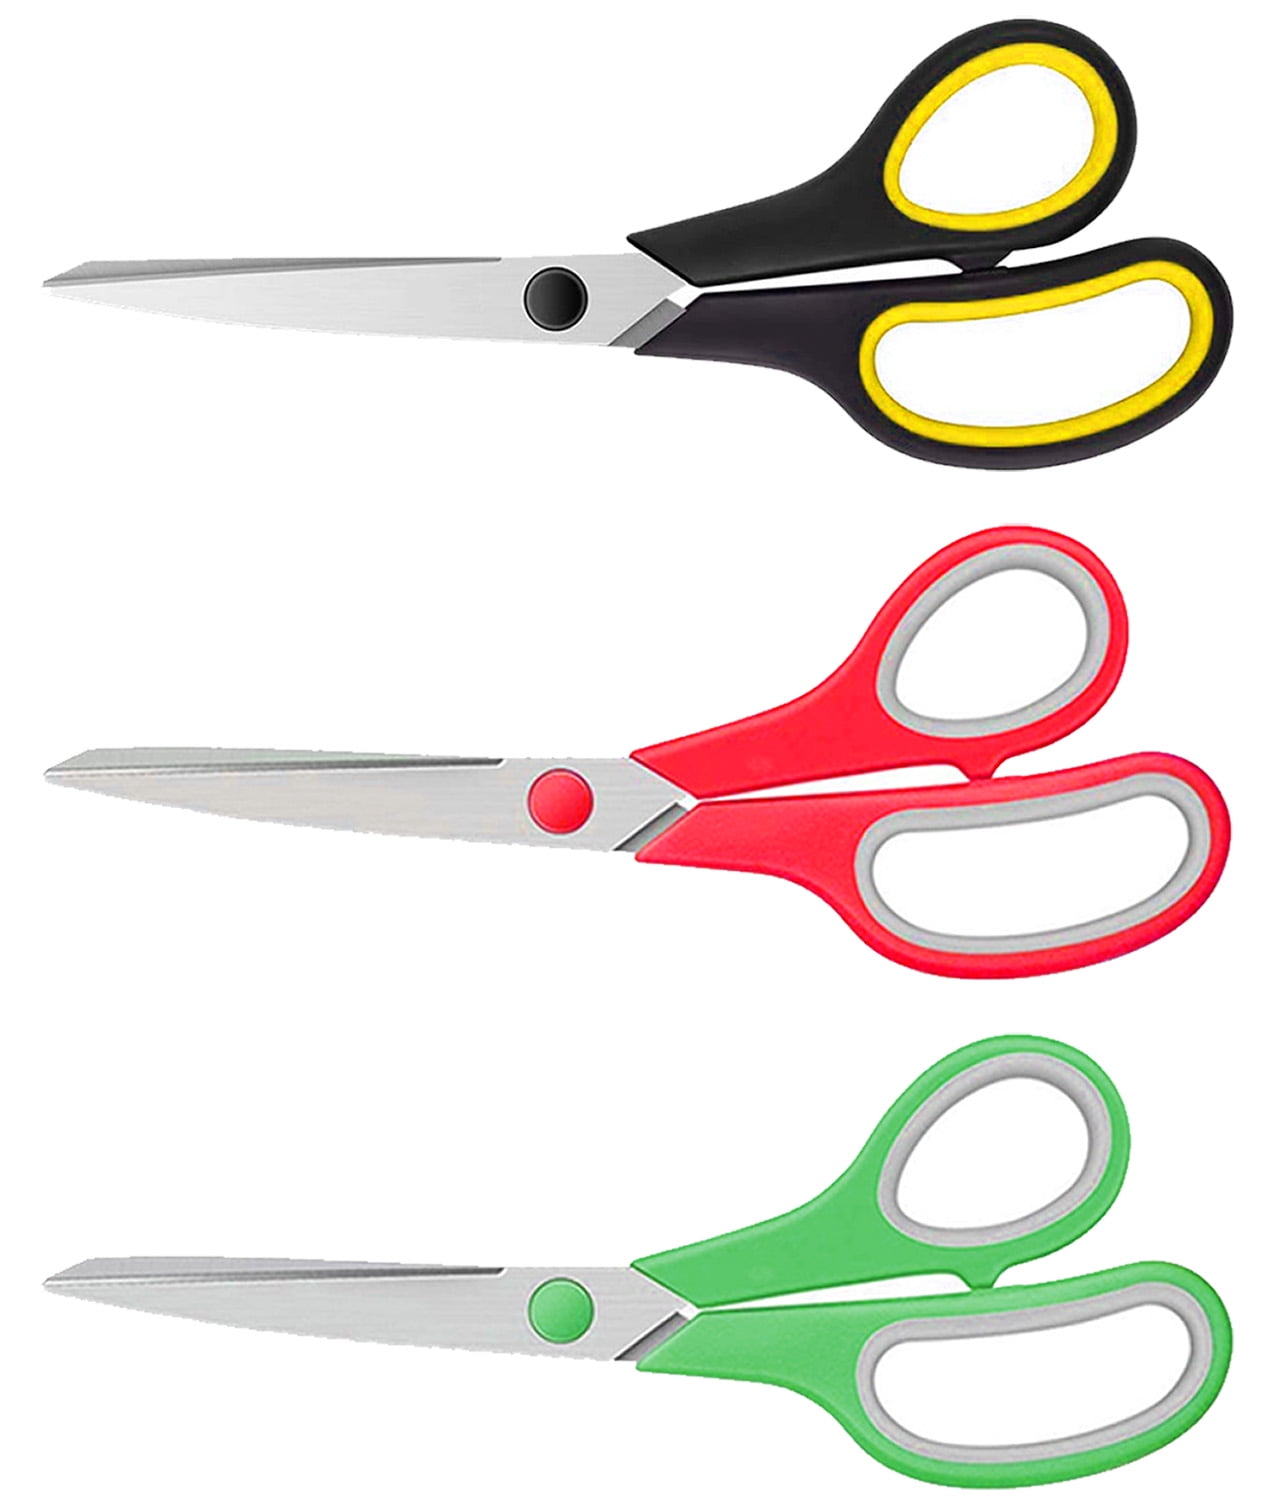 ZekPro 3 Pack Scissors 8 Craft Scissors All Purpose, Heavy Duty Sharp  Blade Shears Sewing Scissor for Office, Fabric and School Supplies Left -  Right Handed 